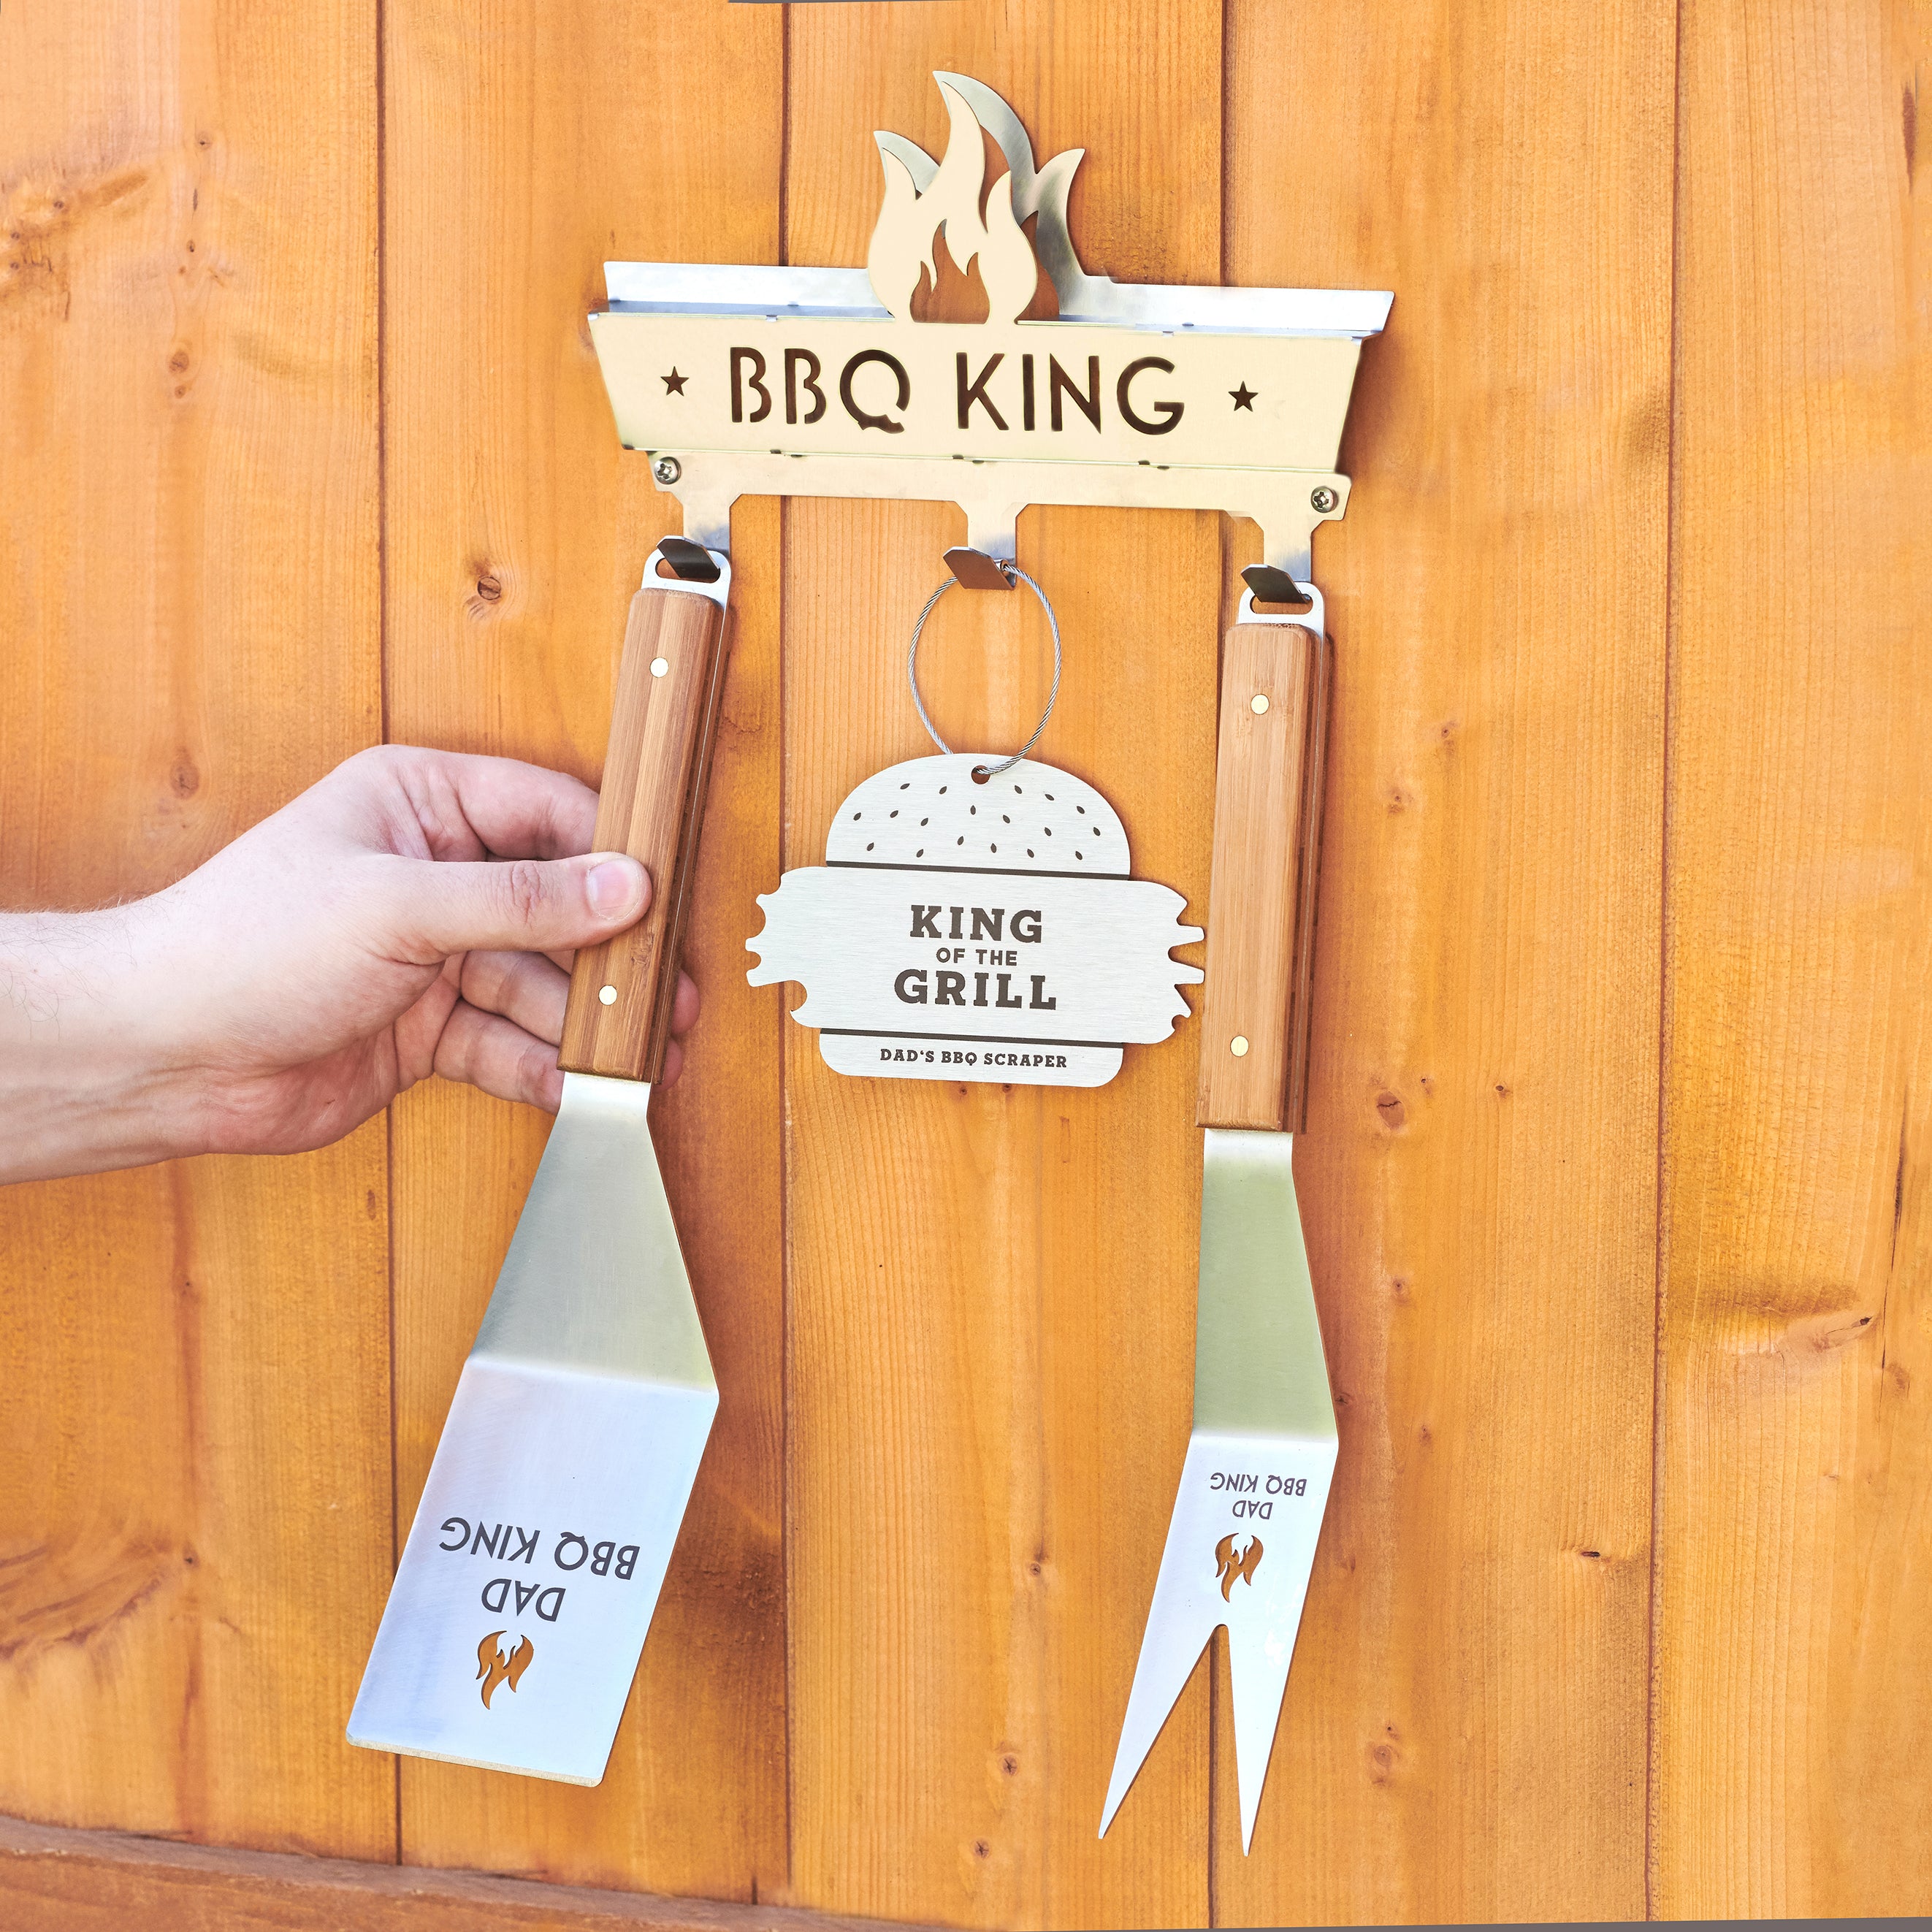 Oakdene Designs Garden Personalised BBQ Rack And Matching Tools